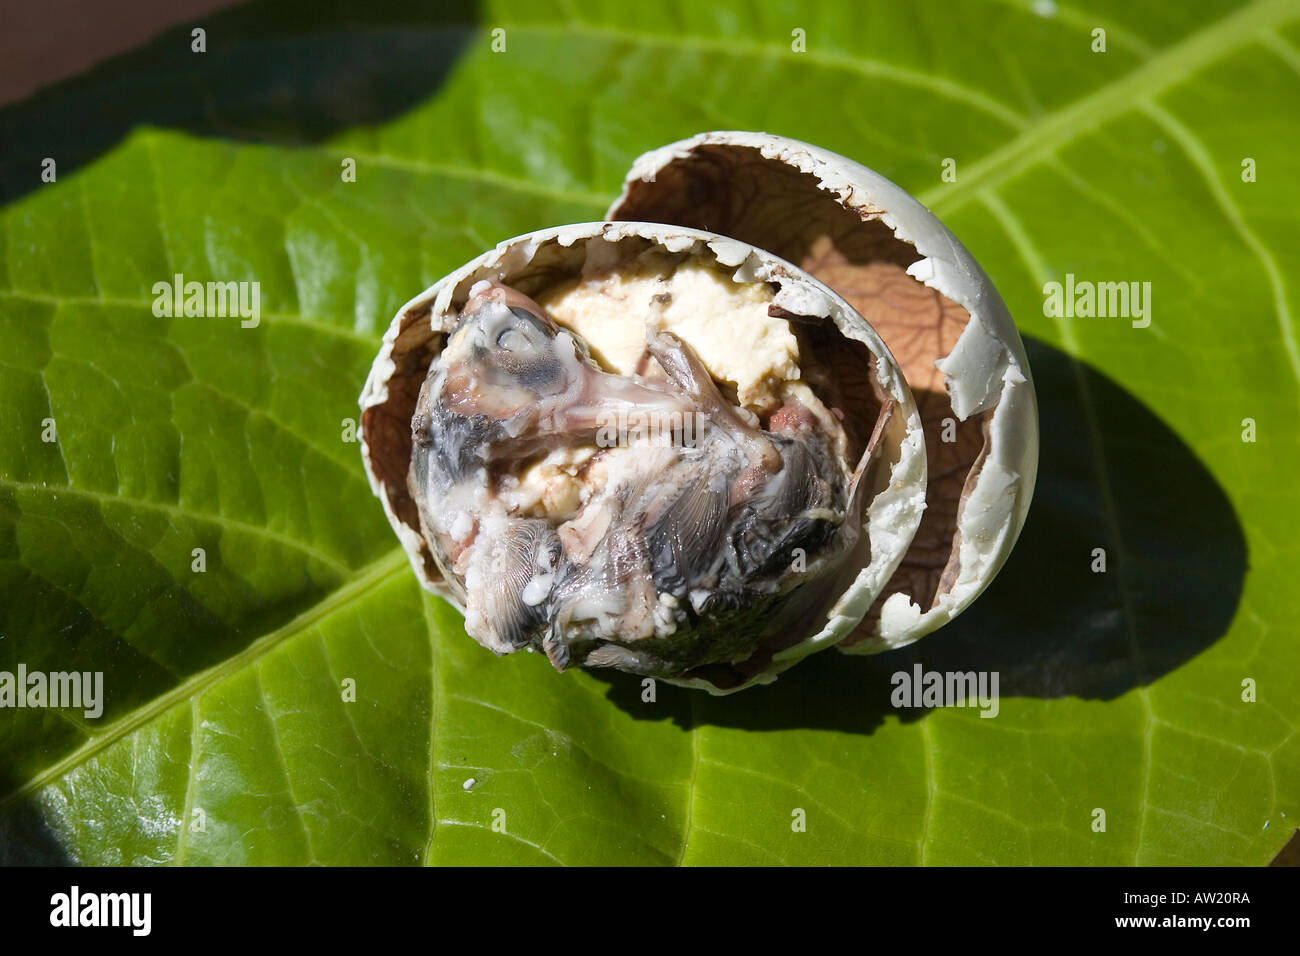 Balut ( duck's egg brood for about 17 days), delicacy on the Philippines Stock Photo